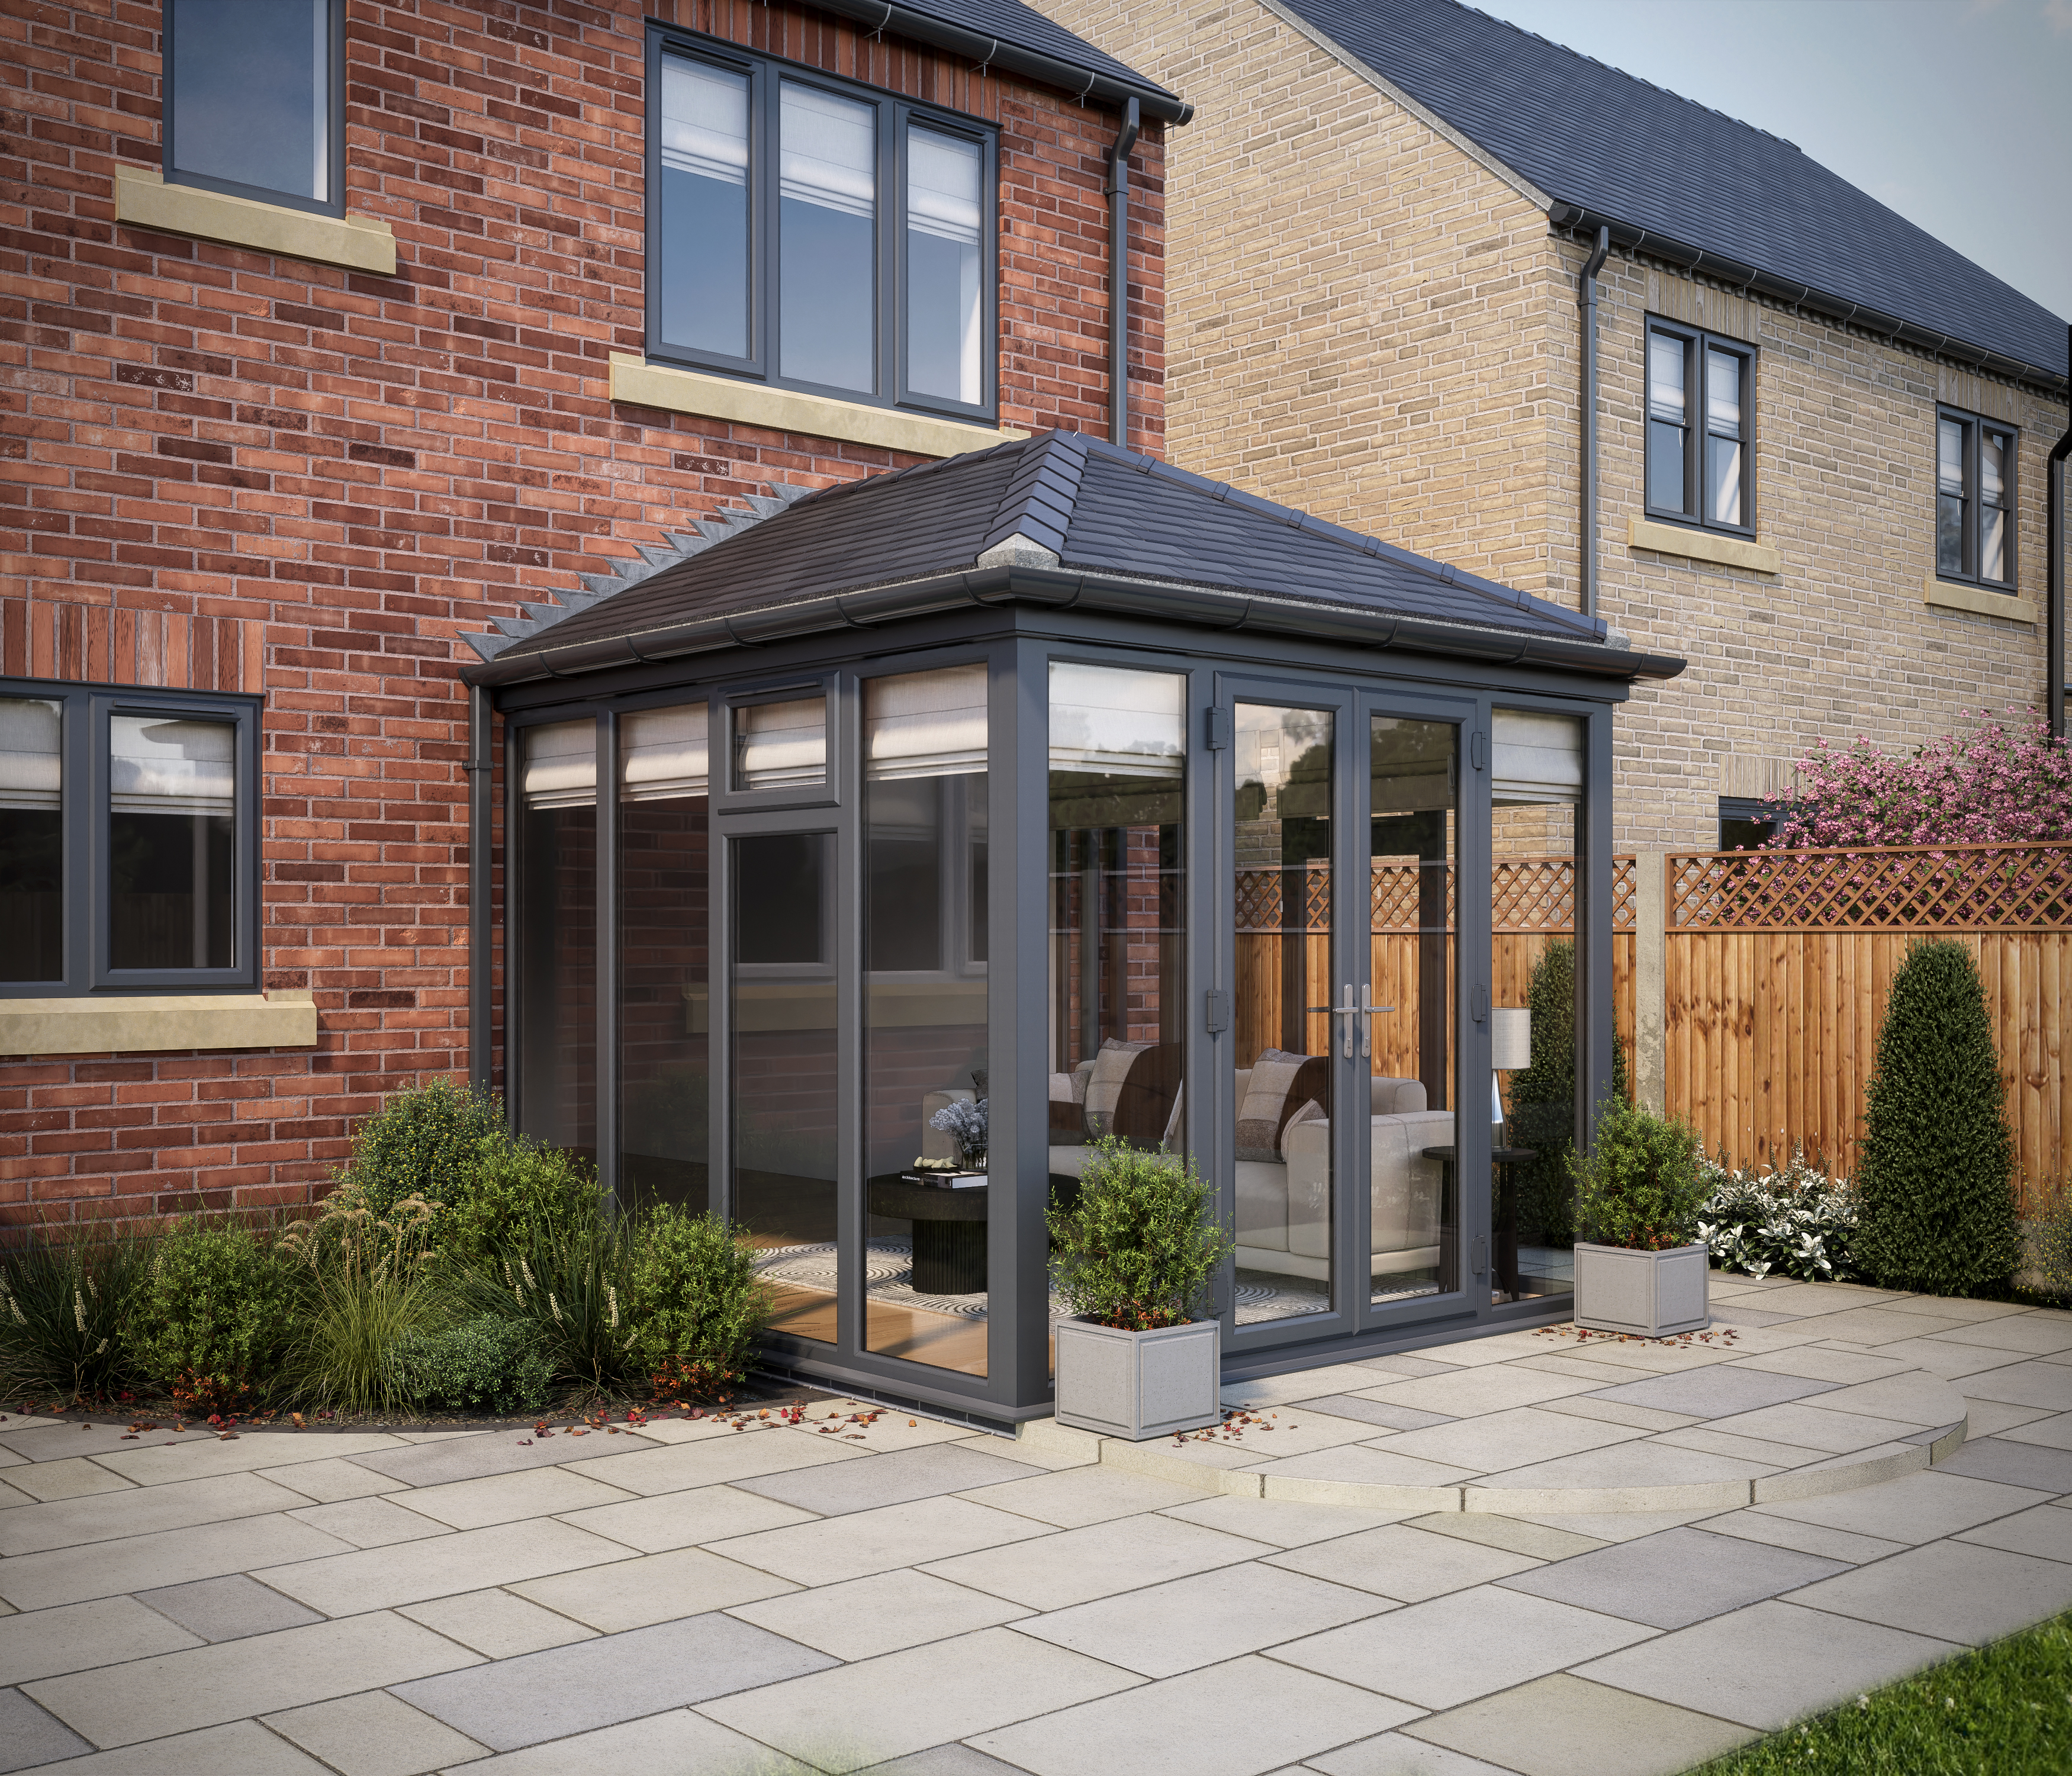 Image of SOLid Roof Full Height Edwardian Conservatory Grey Frames with Titanium Grey Tiles - 13 x 13ft